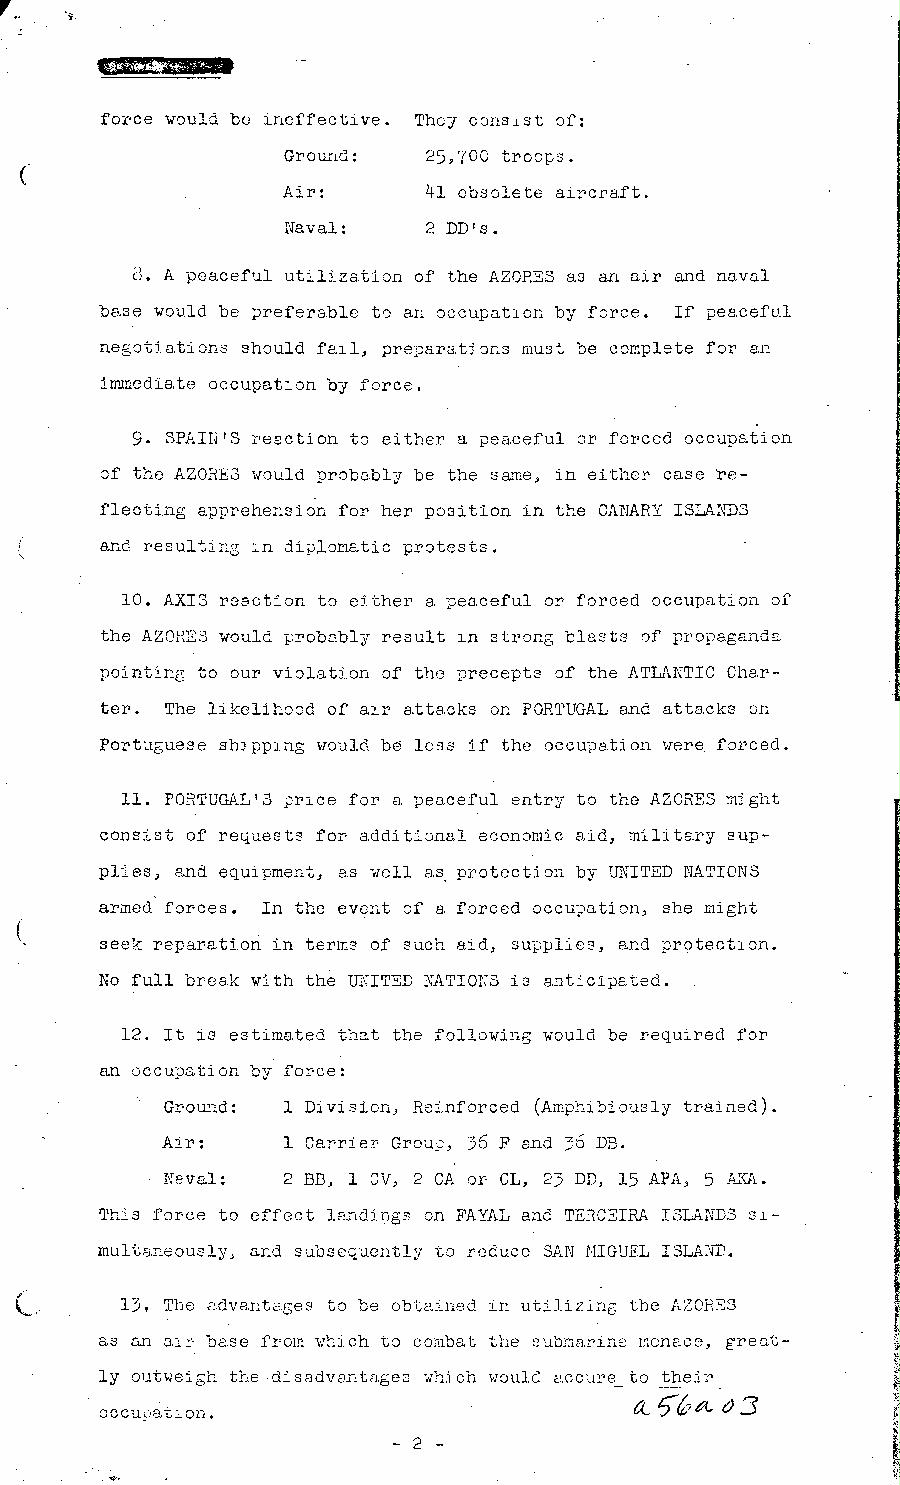 [a56a03.jpg] - Joint Chiefs of Staff Reprt; Seizure of Peaceful Occupation of the Azores-May 16, 1943